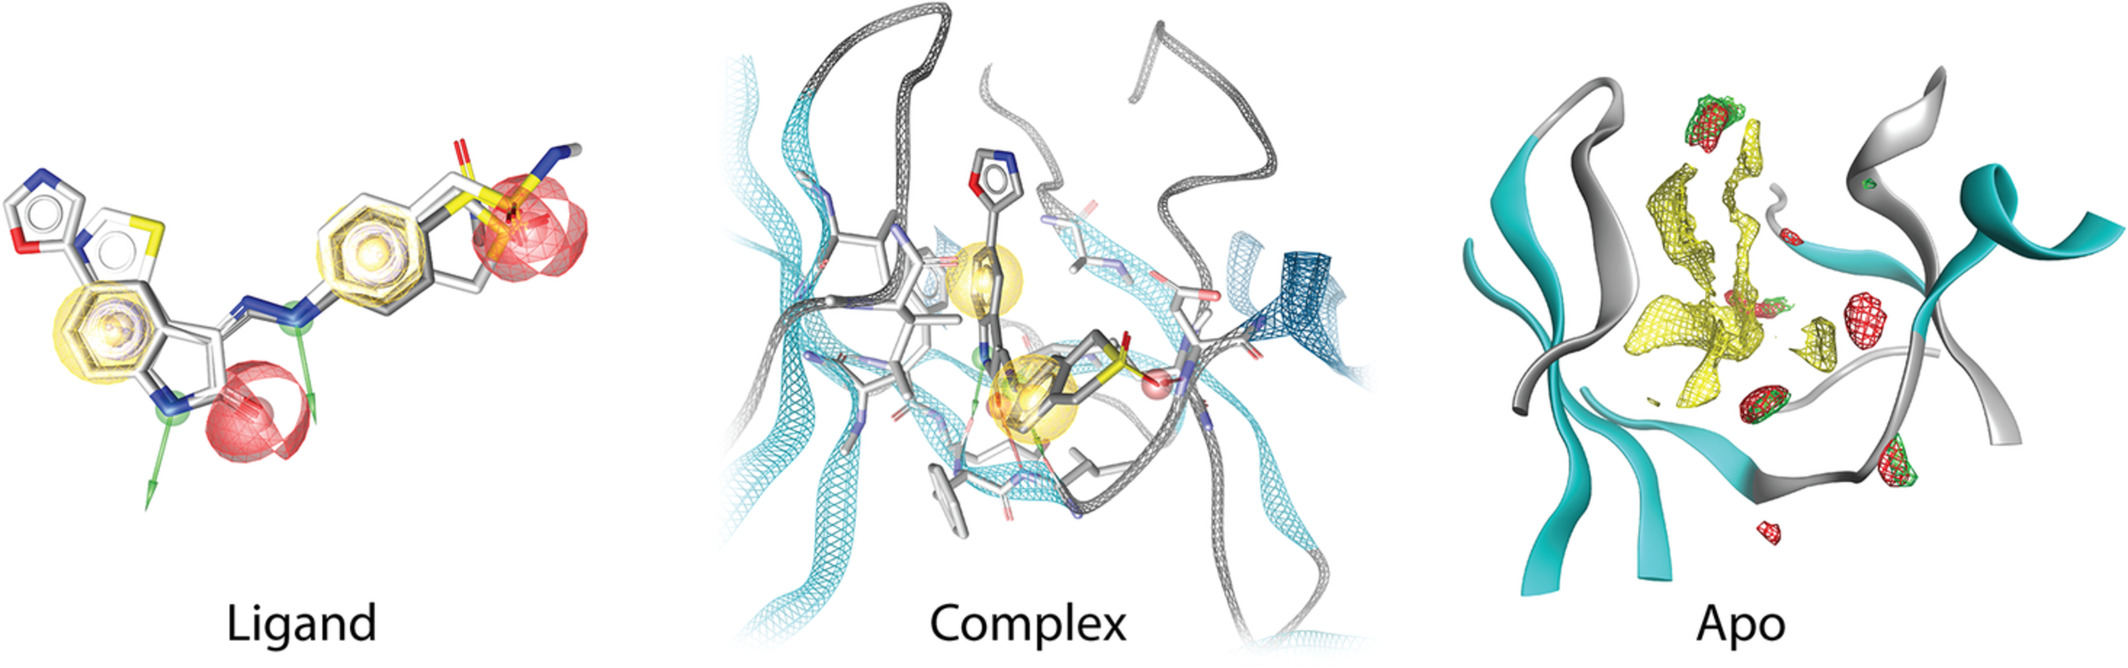 Pharmacophore modeling approaches based on the available data.